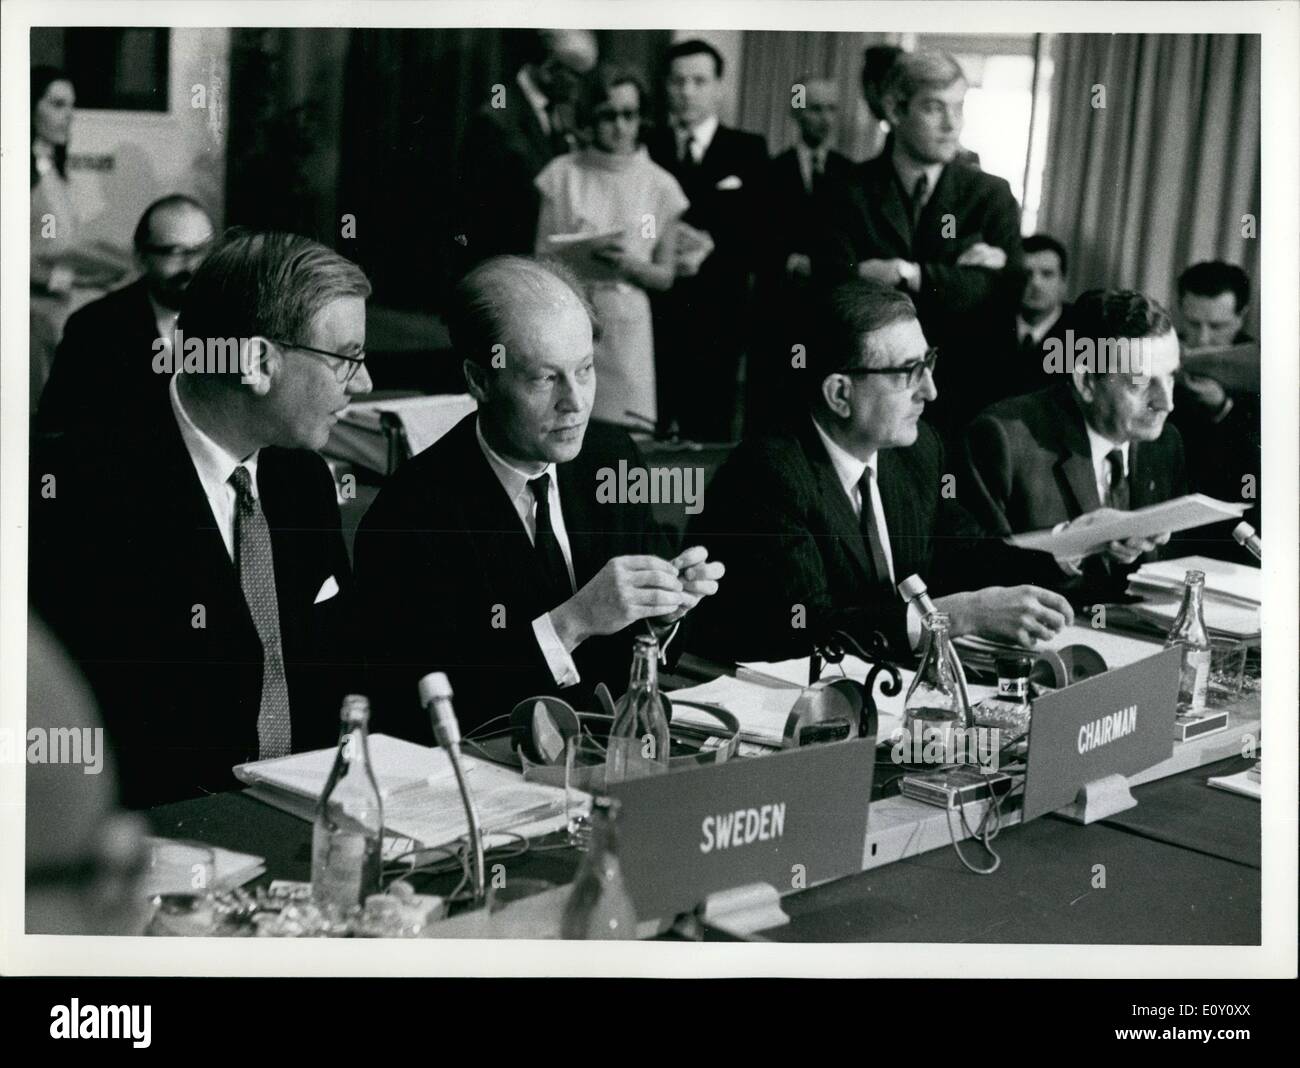 Mar. 03, 1968 - Today at the Hotel Foresta in Stockholm, the Ten Members of the Gold Club had a meeting. Photo shows The Delegator of Sweden Krister Wickman and the Chairman. Stock Photo